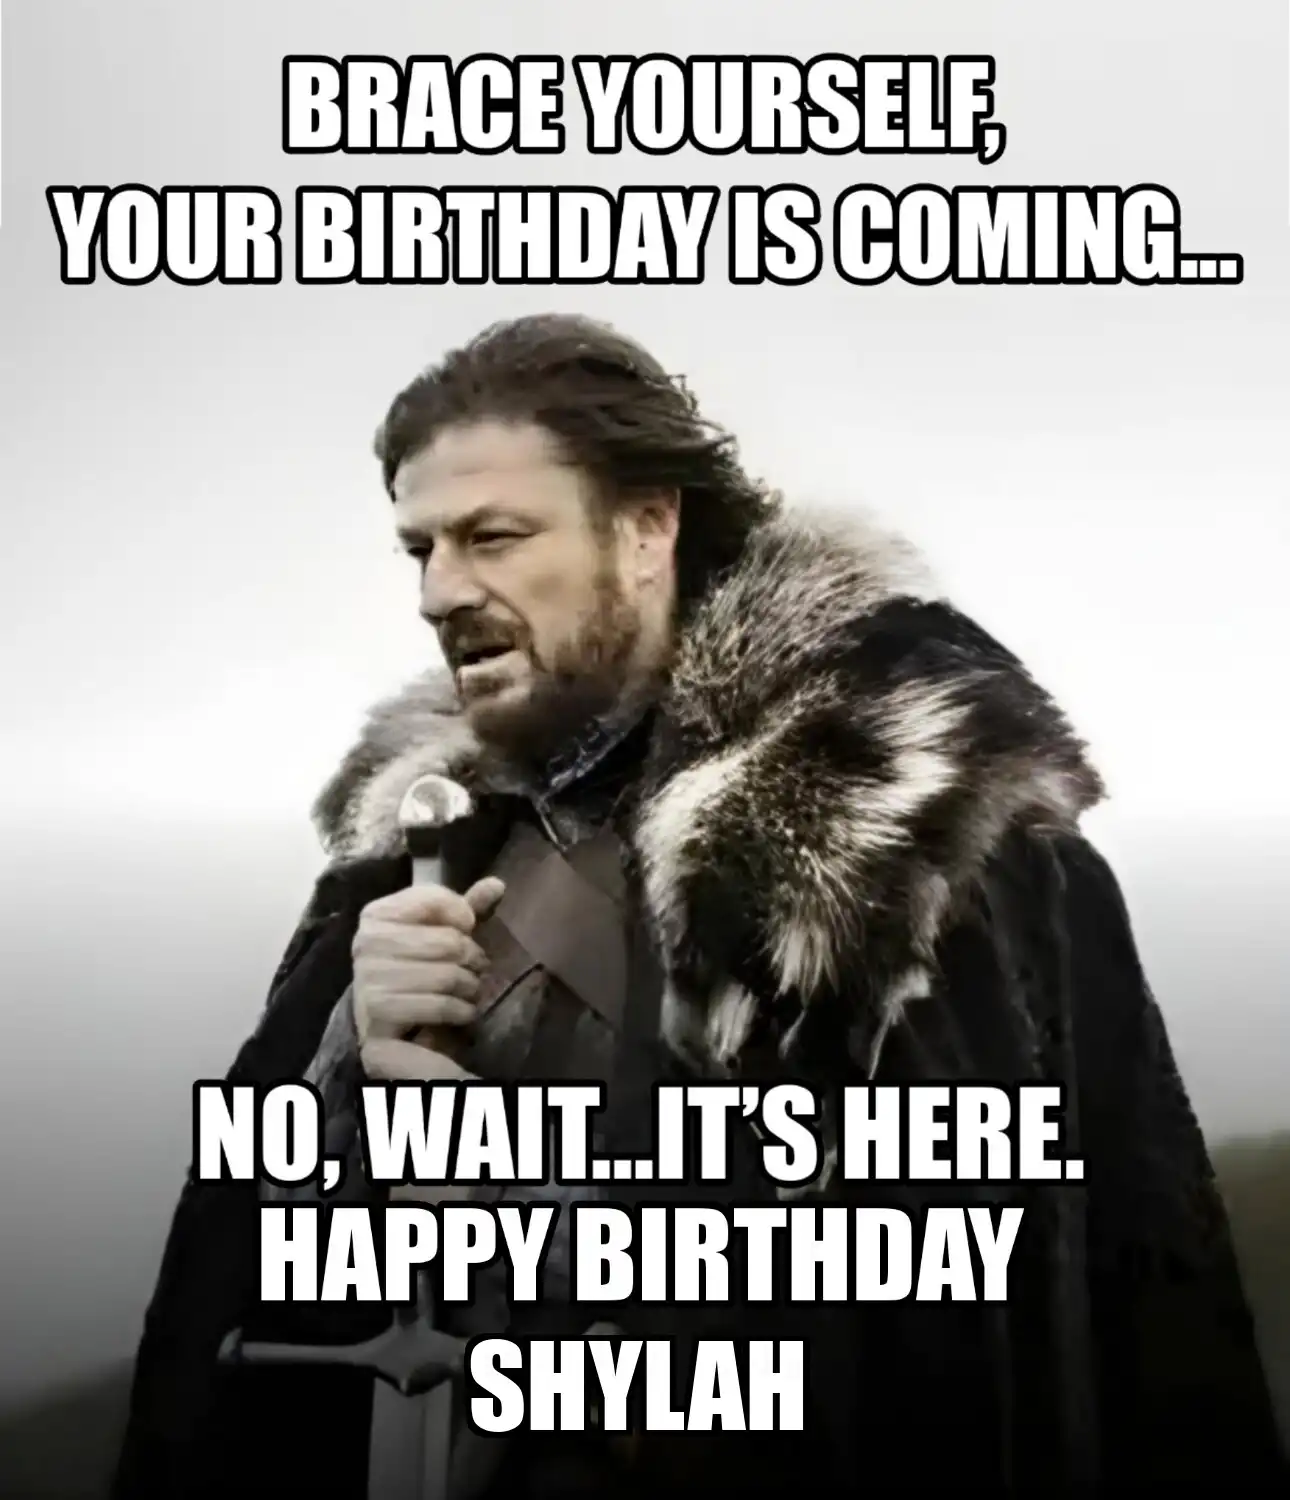 Happy Birthday Shylah Brace Yourself Your Birthday Is Coming Meme